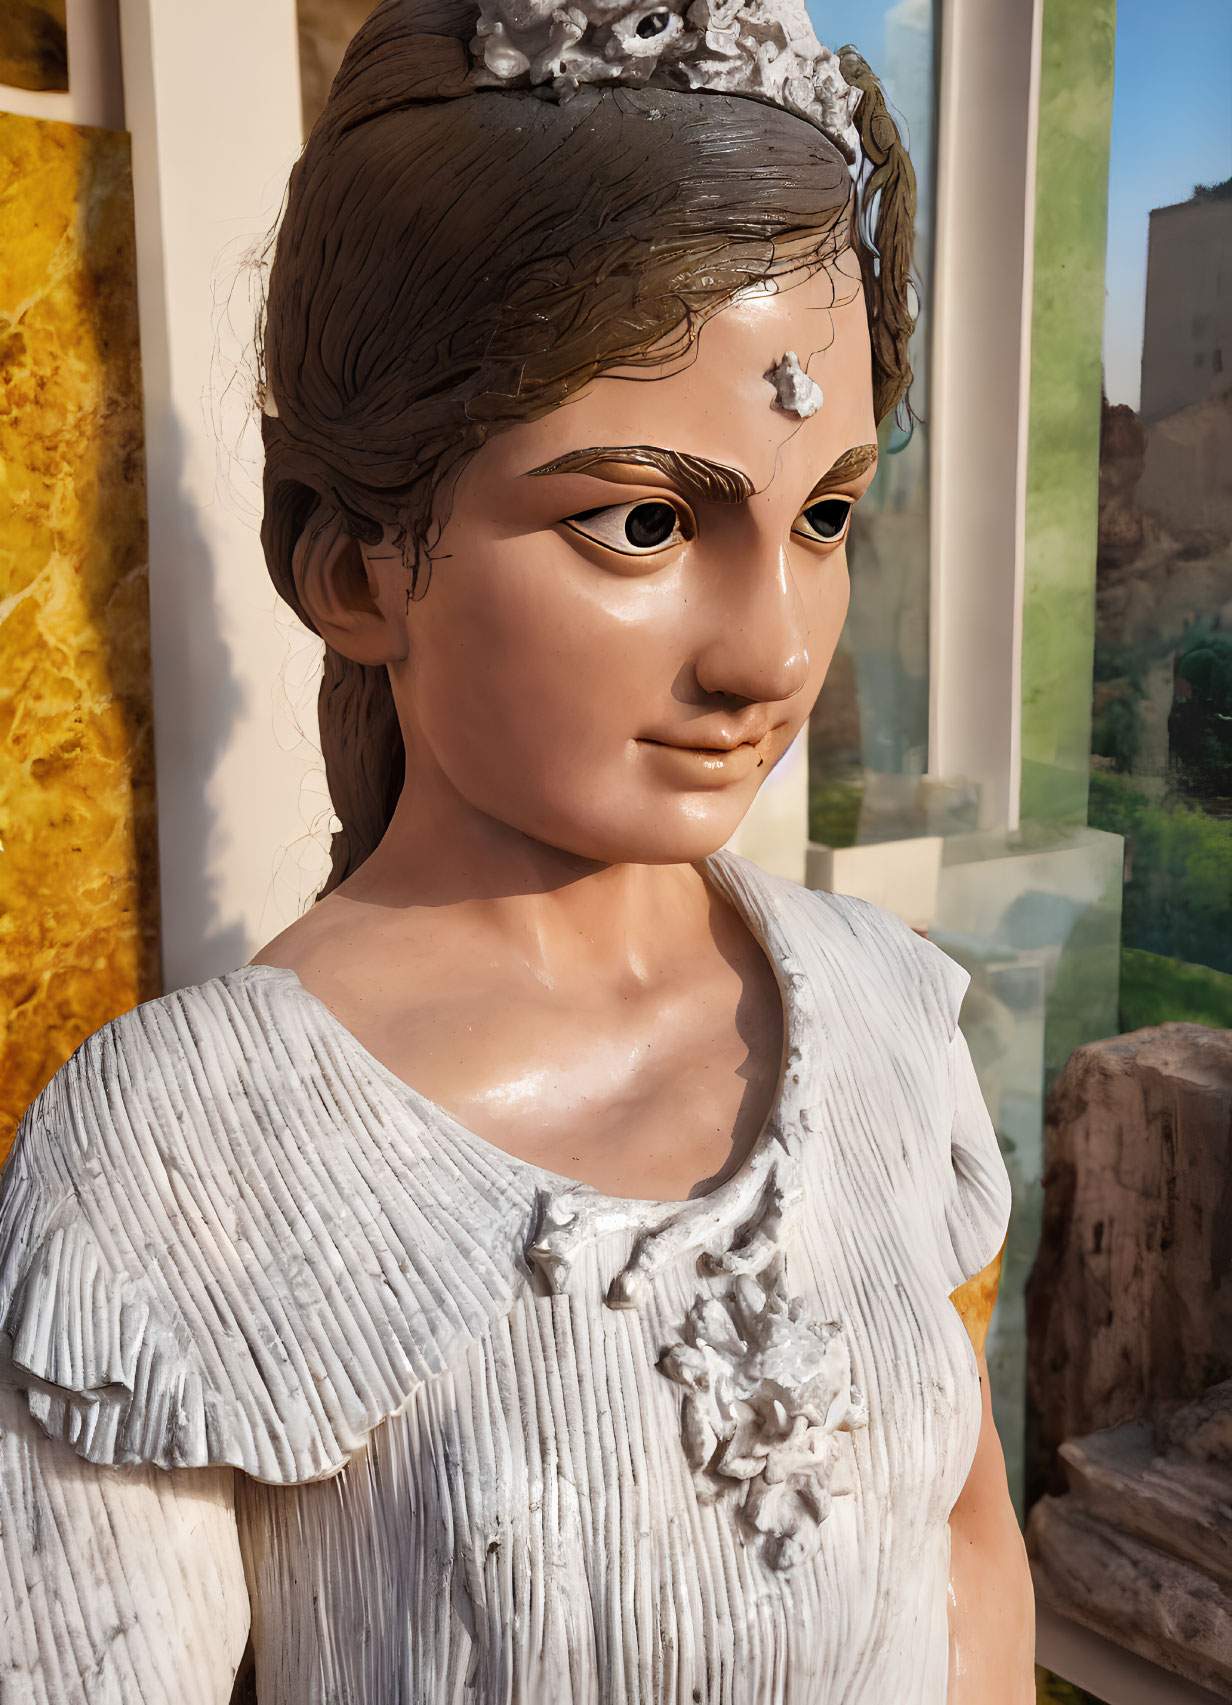 Detailed close-up of a statue with textured dress and headpiece in warm lighting